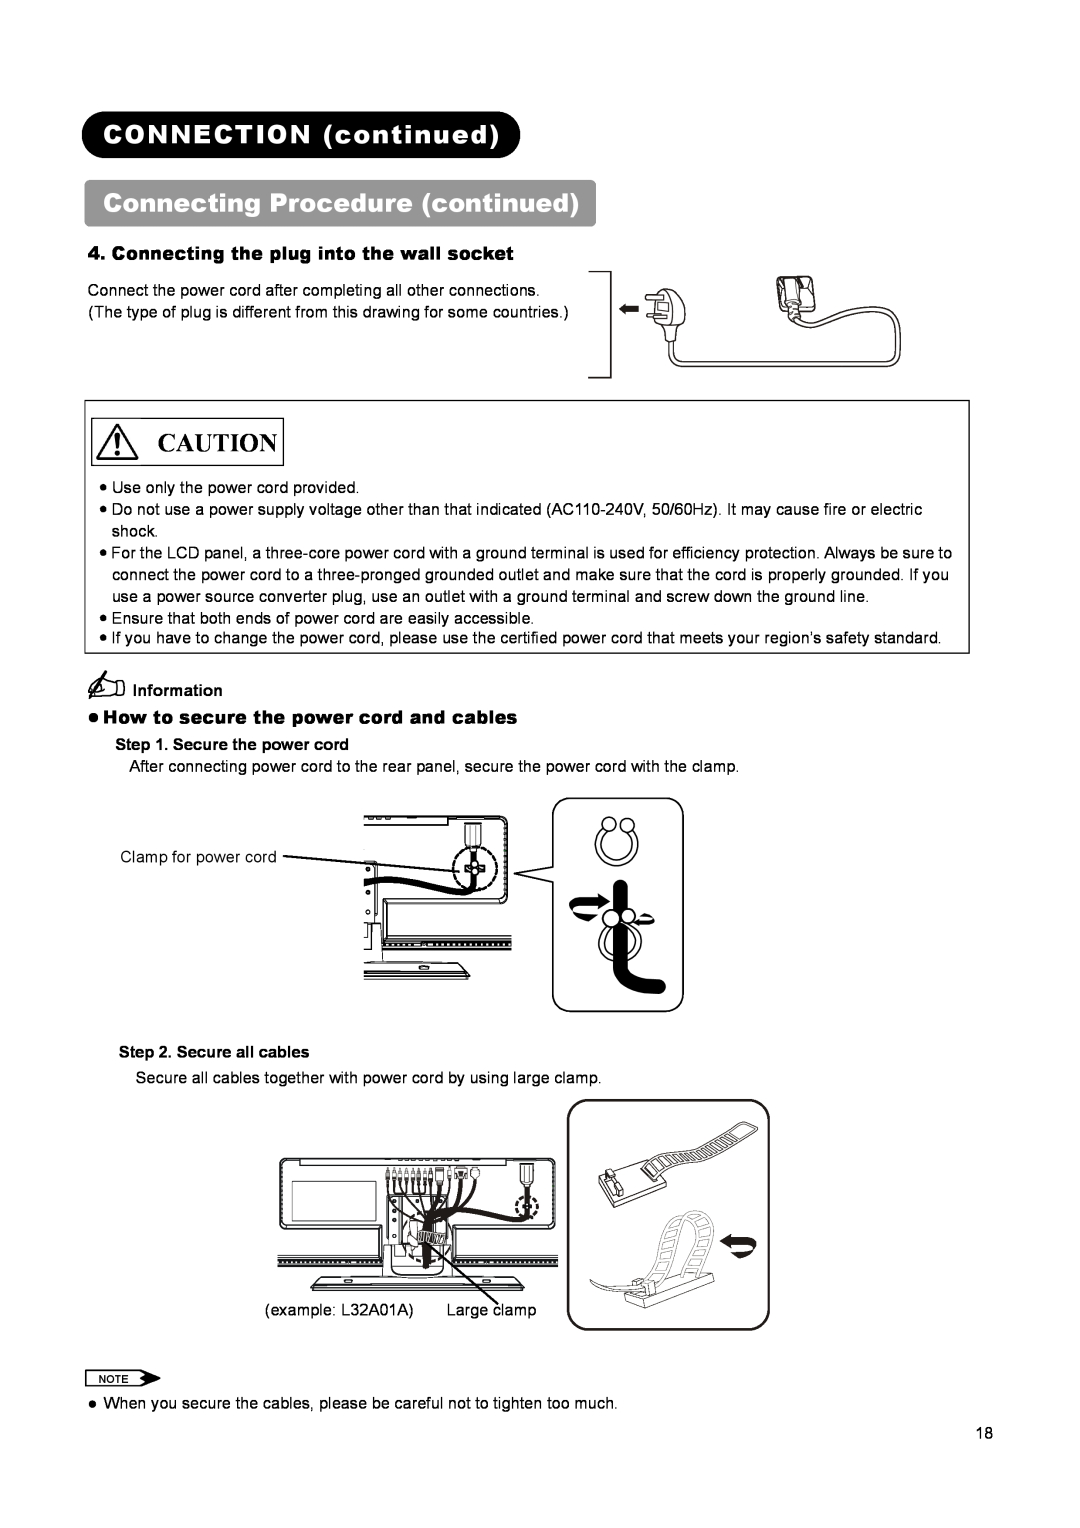 Hitachi L32A01A Connecting the plug into the wall socket, z How to secure the power cord and cables, Clamp for power cord 